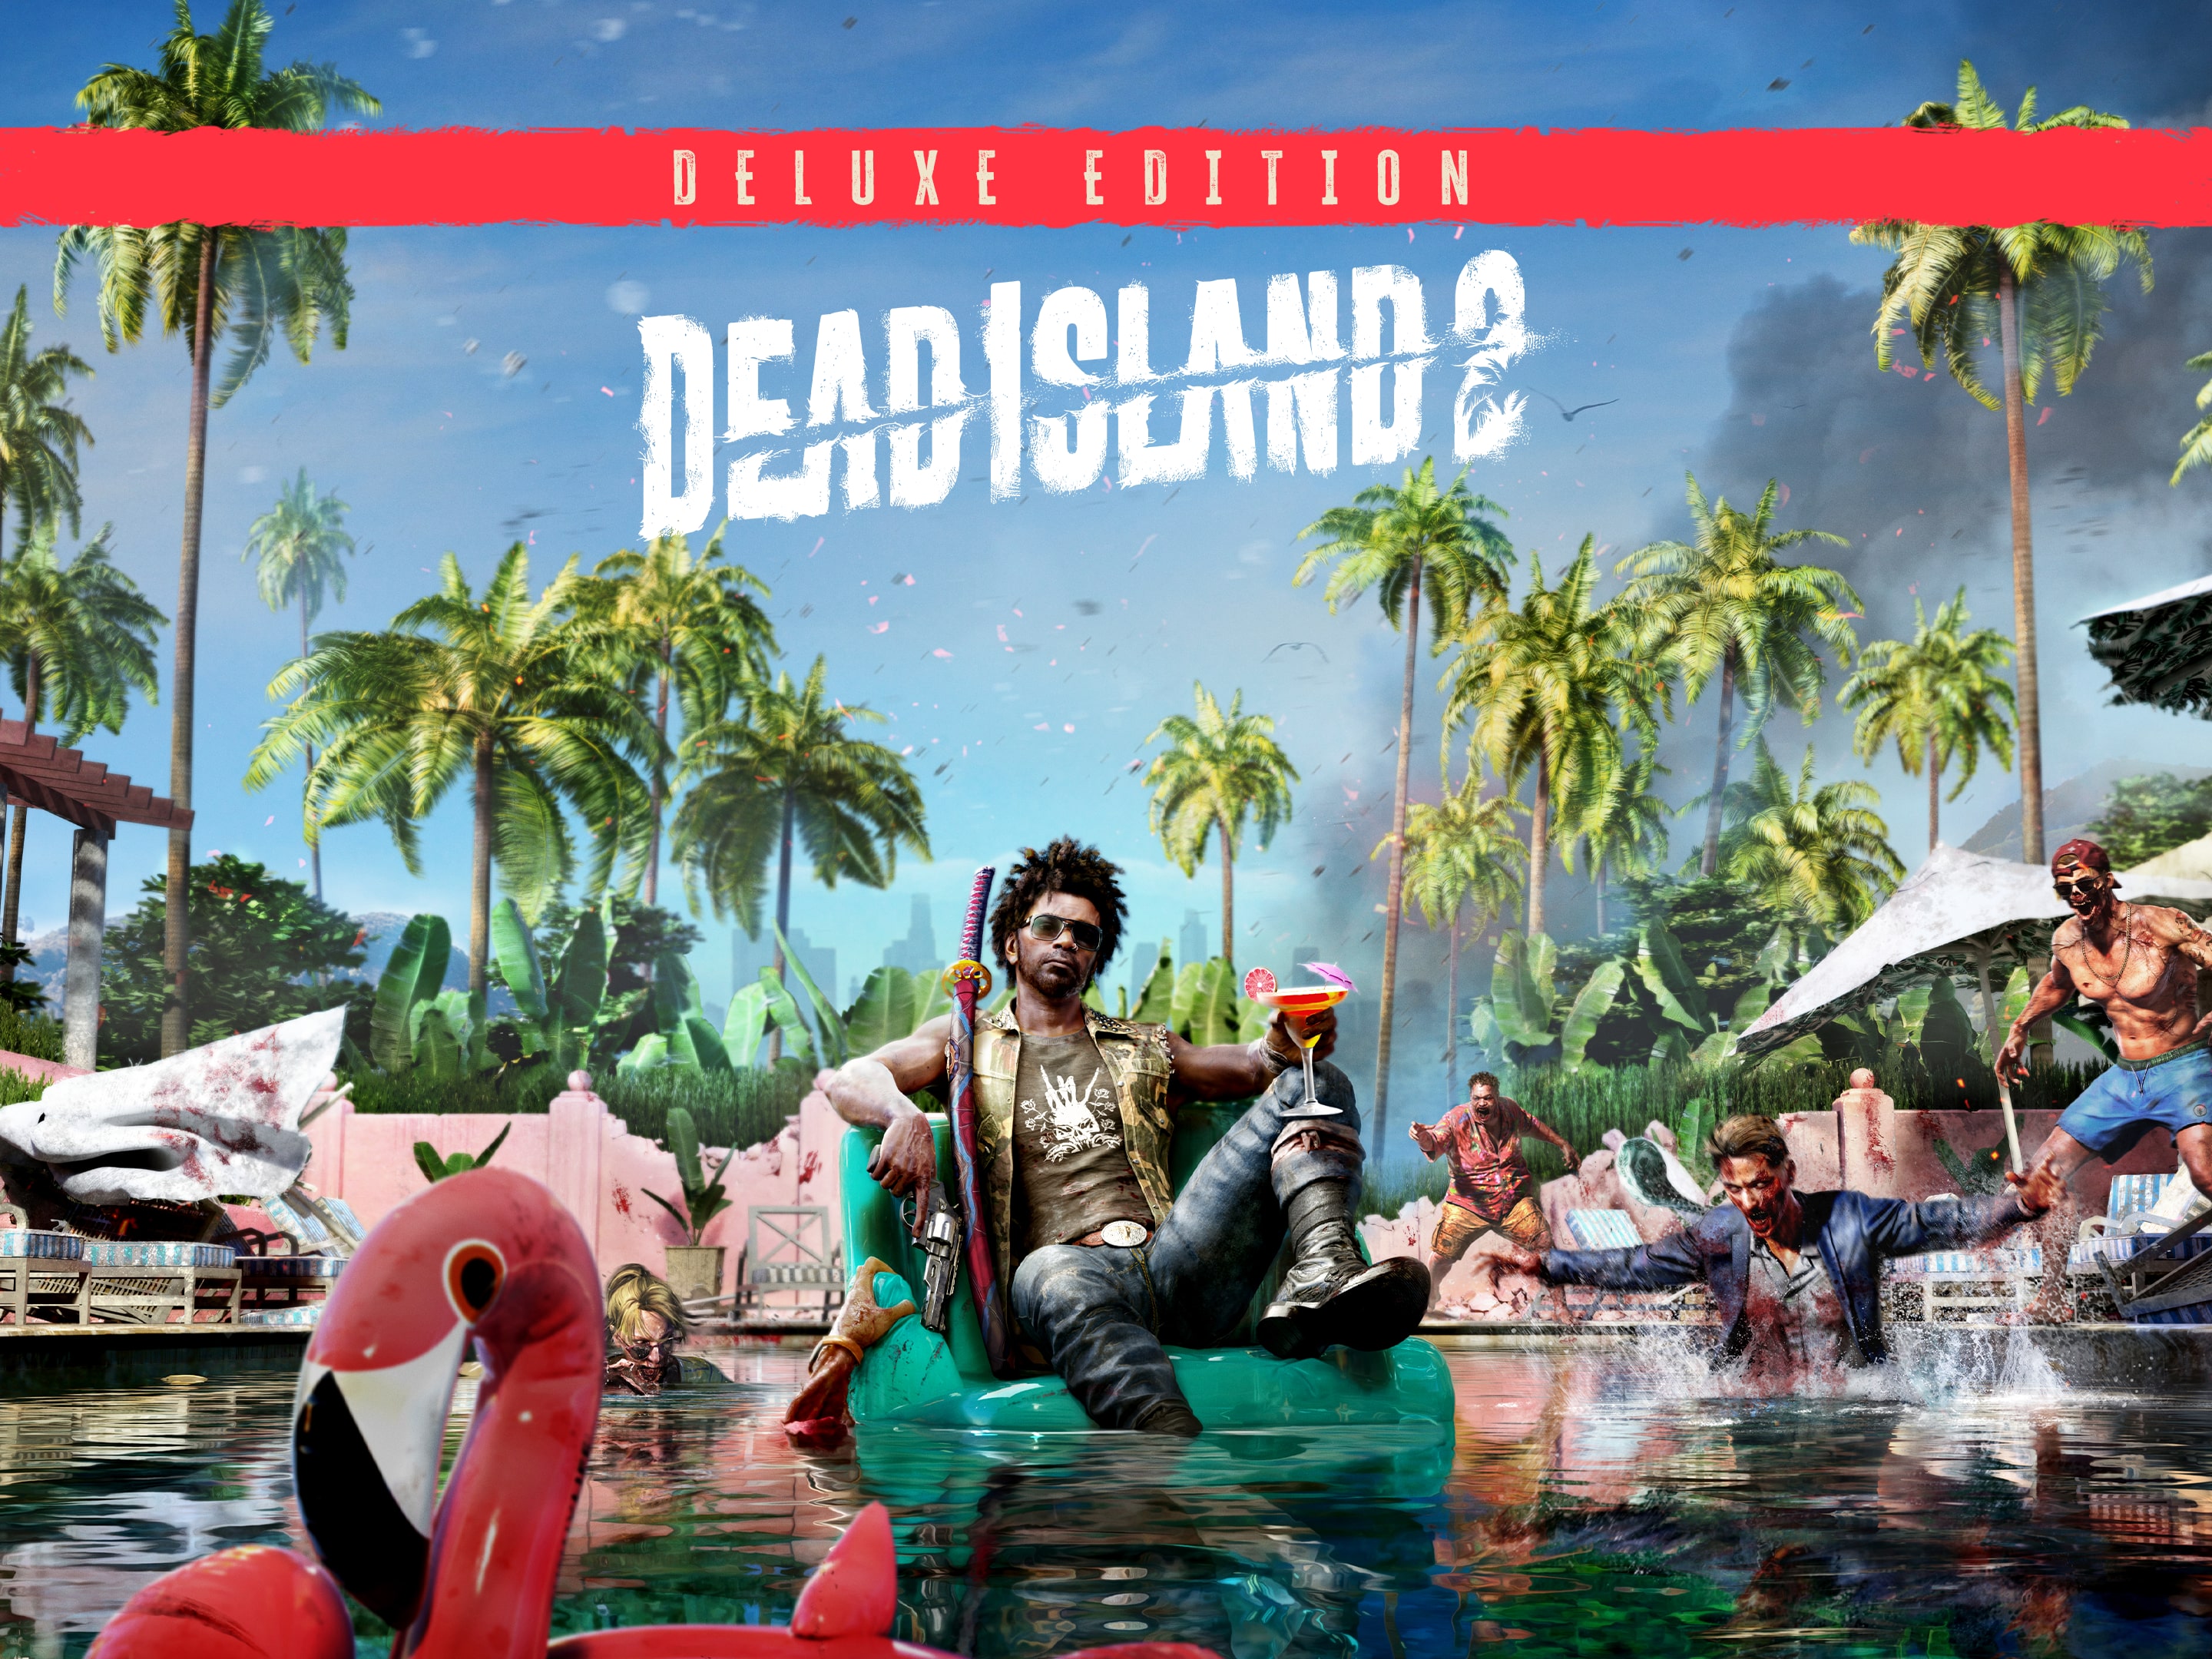 DEAD ISLAND 2 (PS4) - New Level